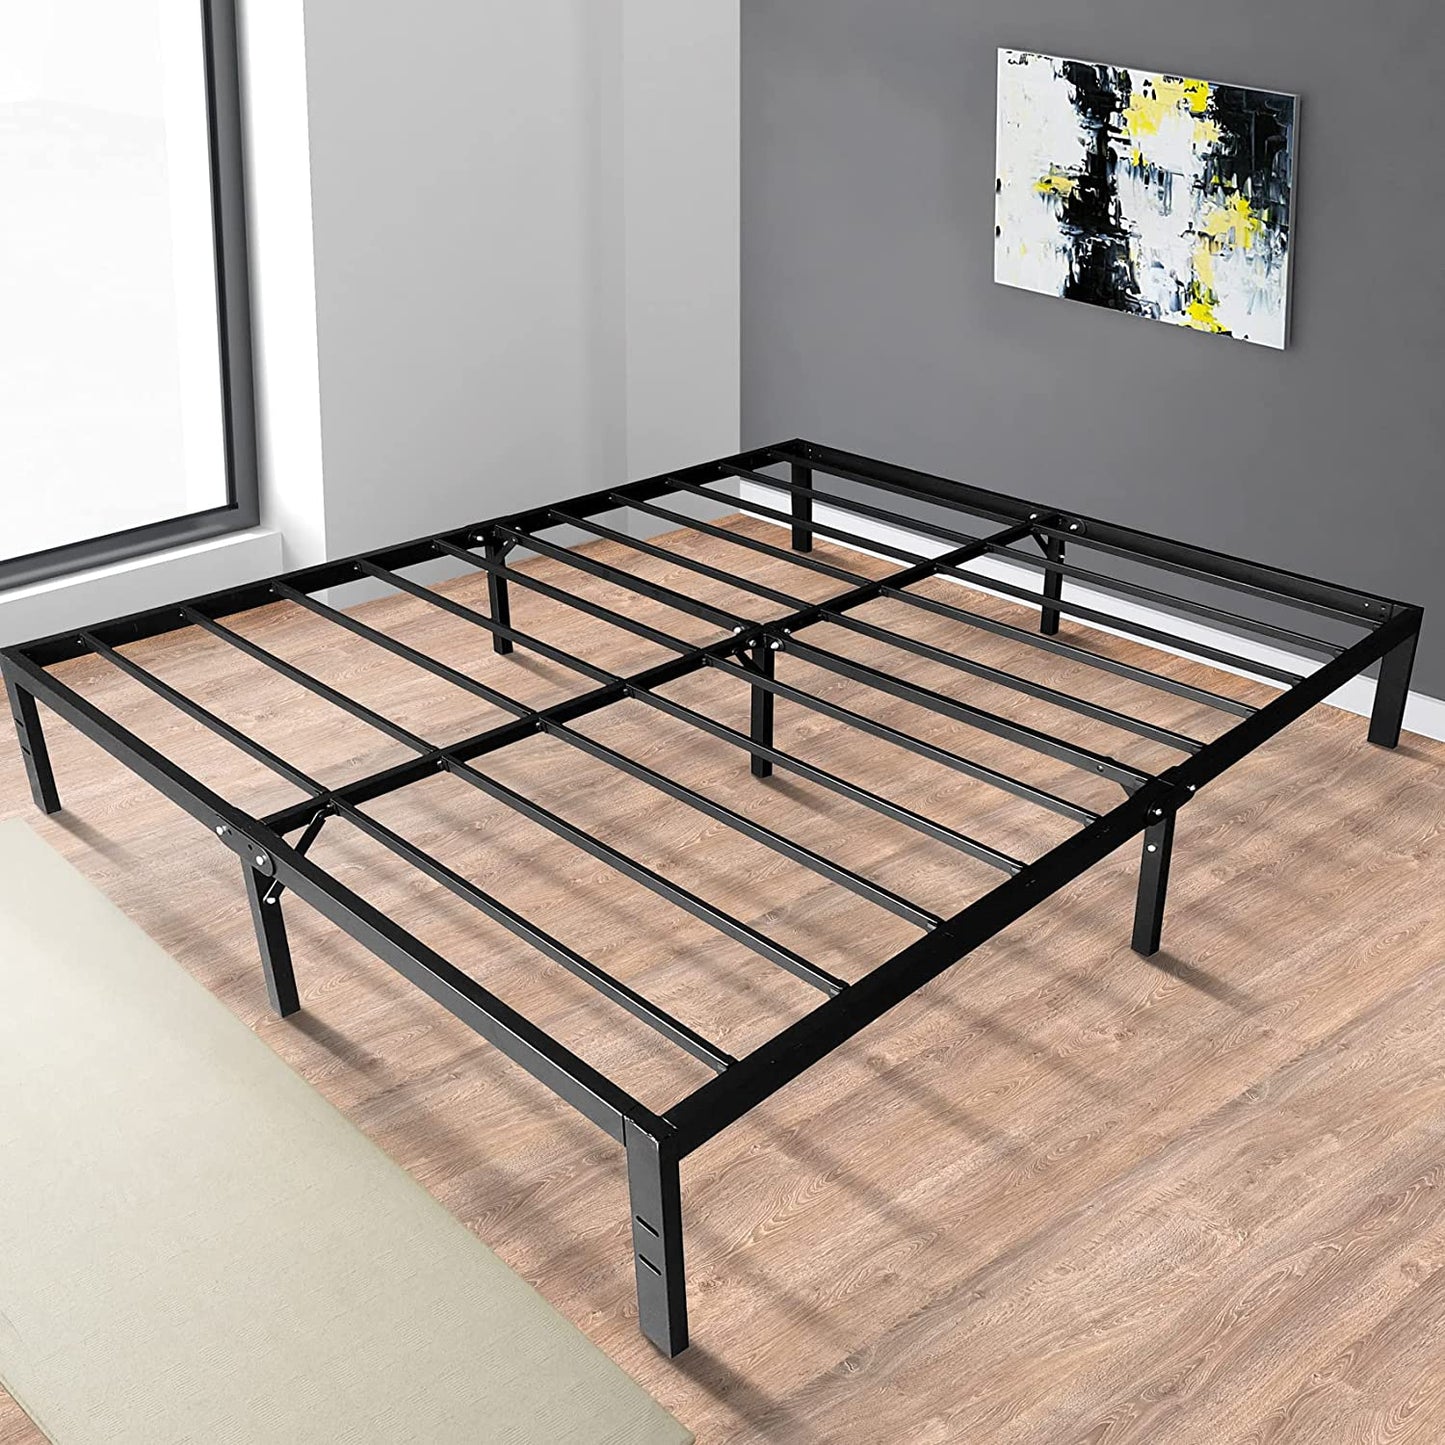 UNICOO - Metal Platform Bed Frame Heavy Duty Steel Slat/ Anti-Slip Support/ Easy Assembly/ Mattress Foundation/ Bed Frame/ Noise Free/ No Box Spring Needed